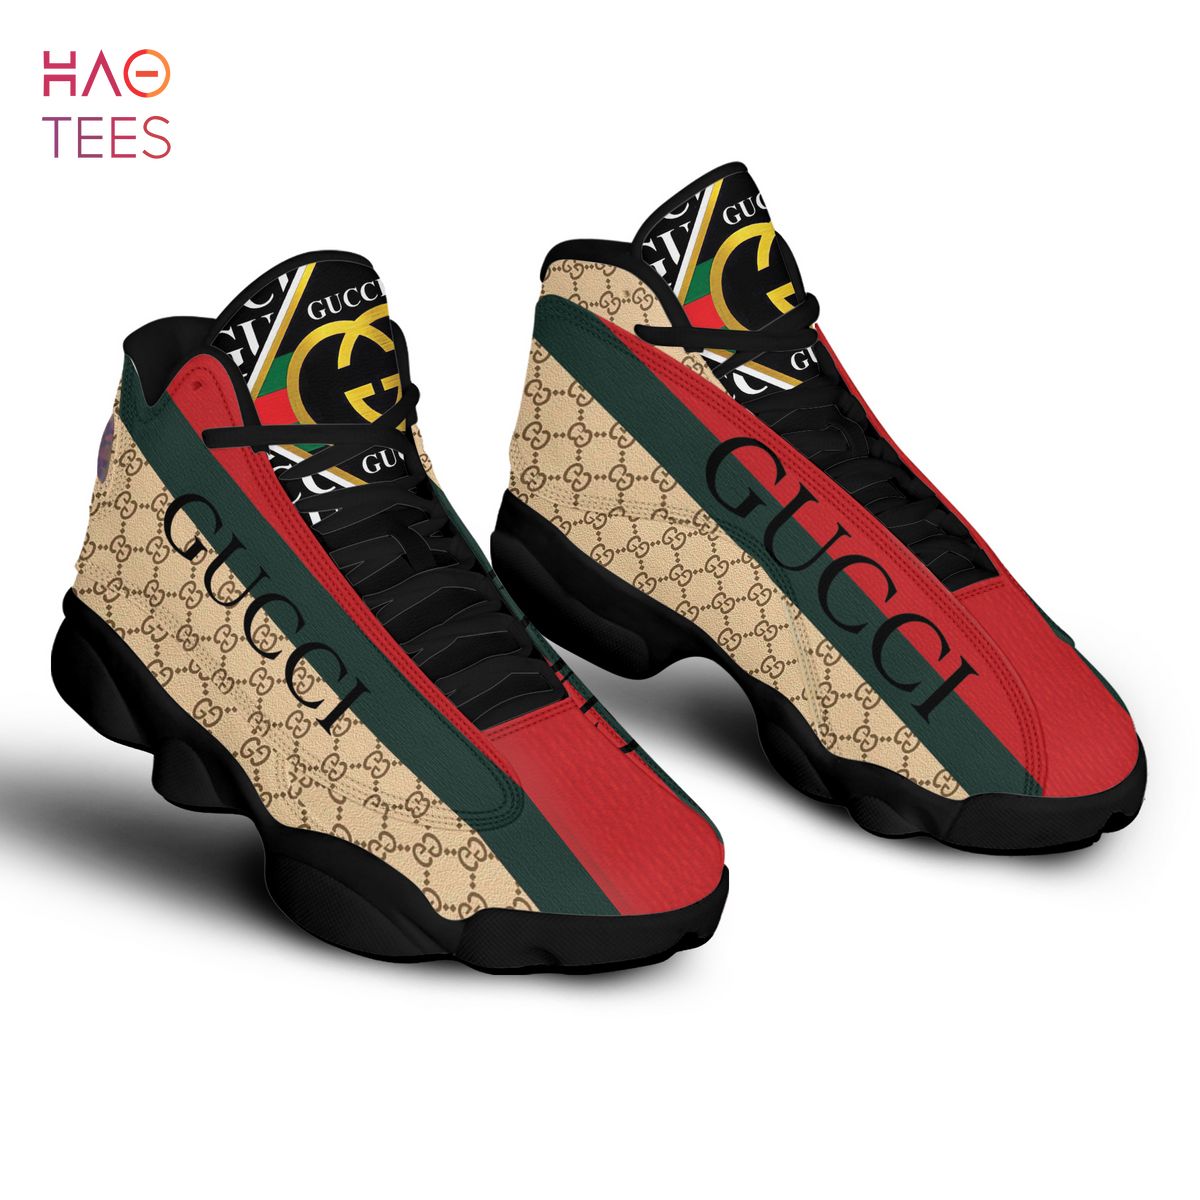 Gucci snake air jordan 13 sneakers shoes hot 2022 gucci gifts for